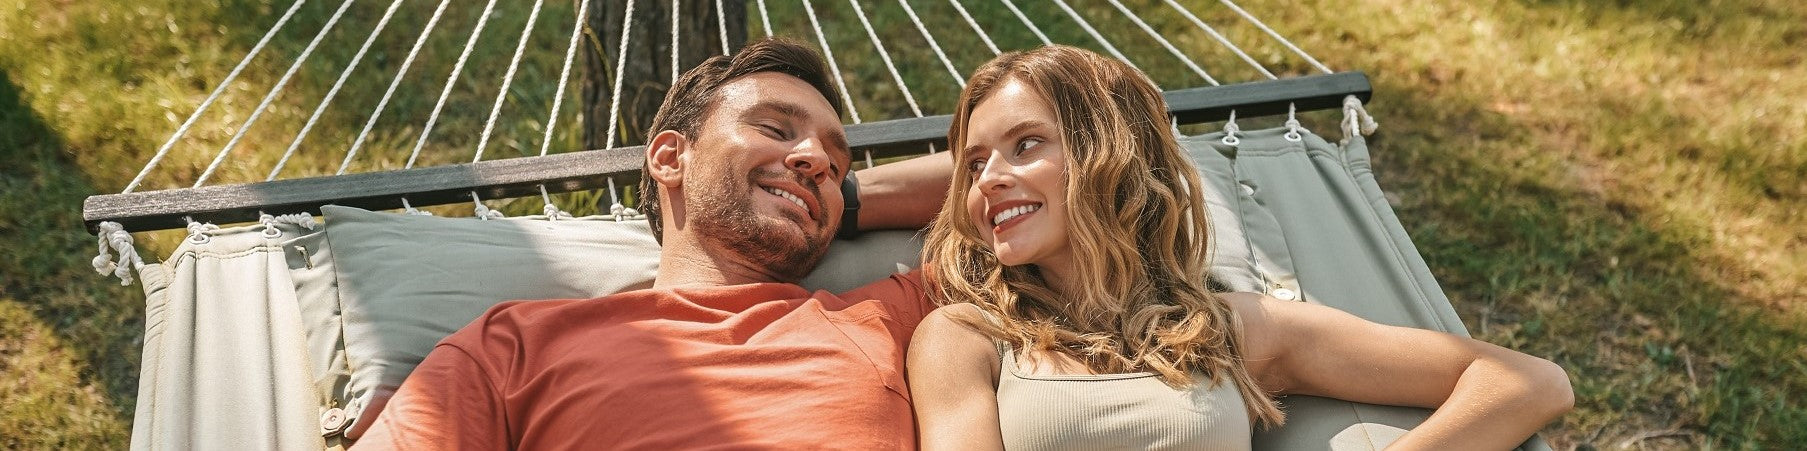 Pampering Each Other: The Key to a Happy Relationship?